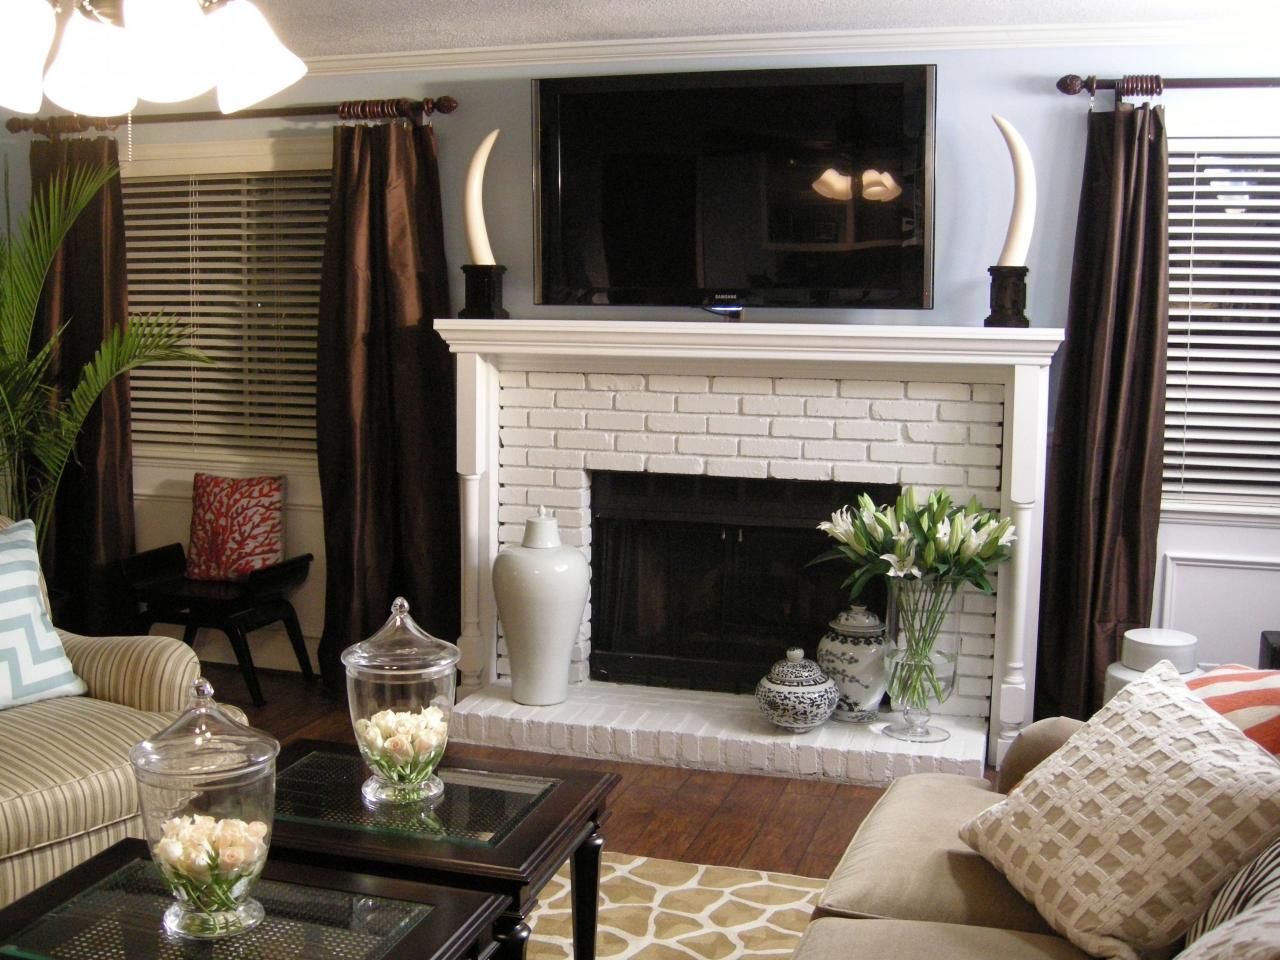 New Fireplace Surround And Mantel, How To Build A Mantel Around Gas Fireplace